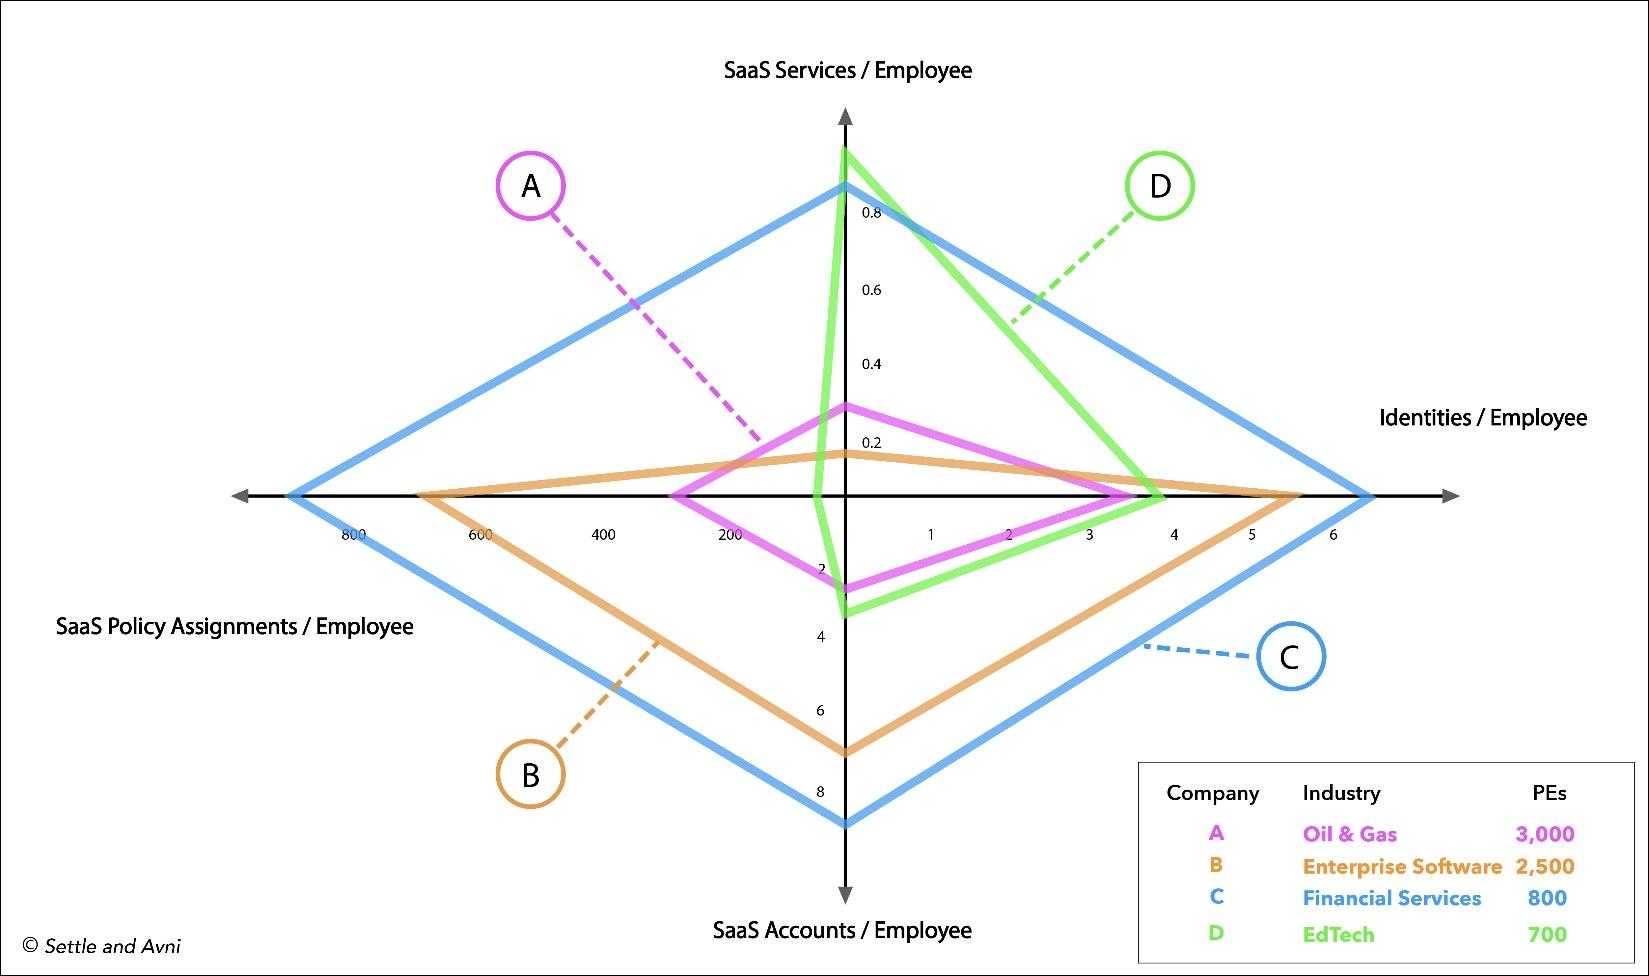 (Figure 2) A SaaS sprawl diagram displaying the number of applications, user identities, user accounts and policy assignments within four different companies normalized to the number of paid employees within each company.